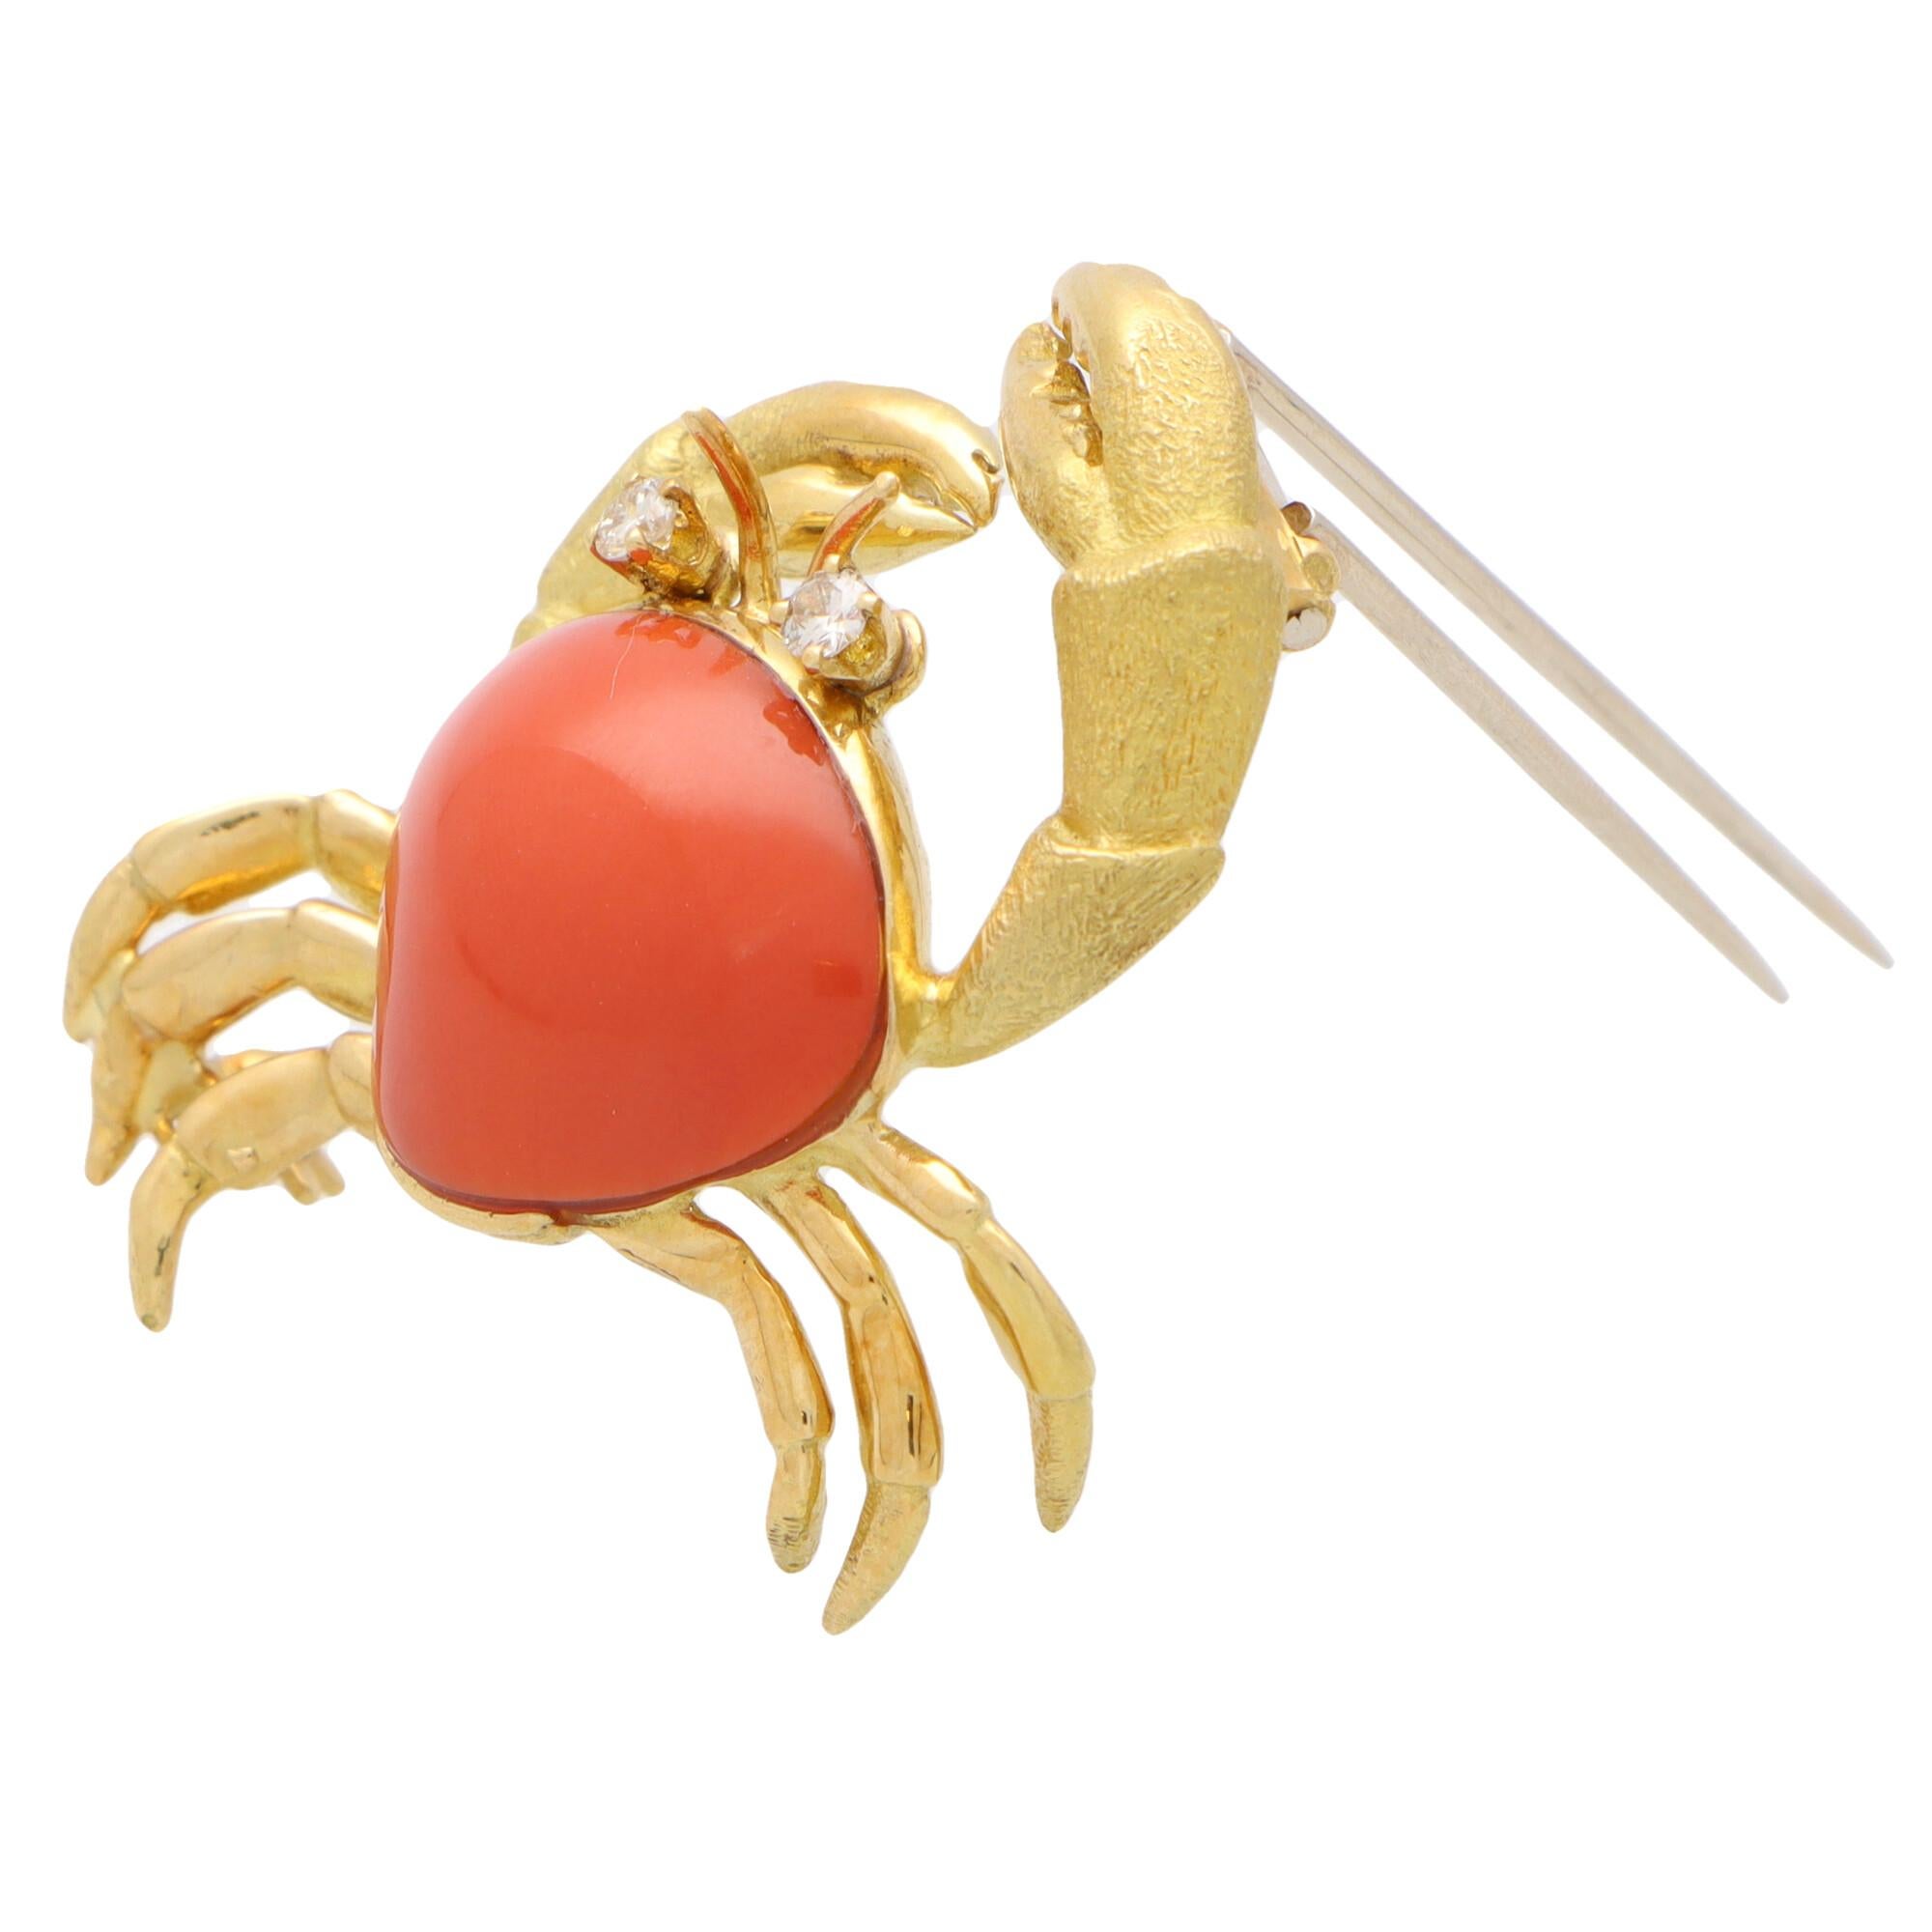 Vintage Tiffany & Co. Coral and Diamond Crab Brooch Pin Set in 18k Yellow Gold 1